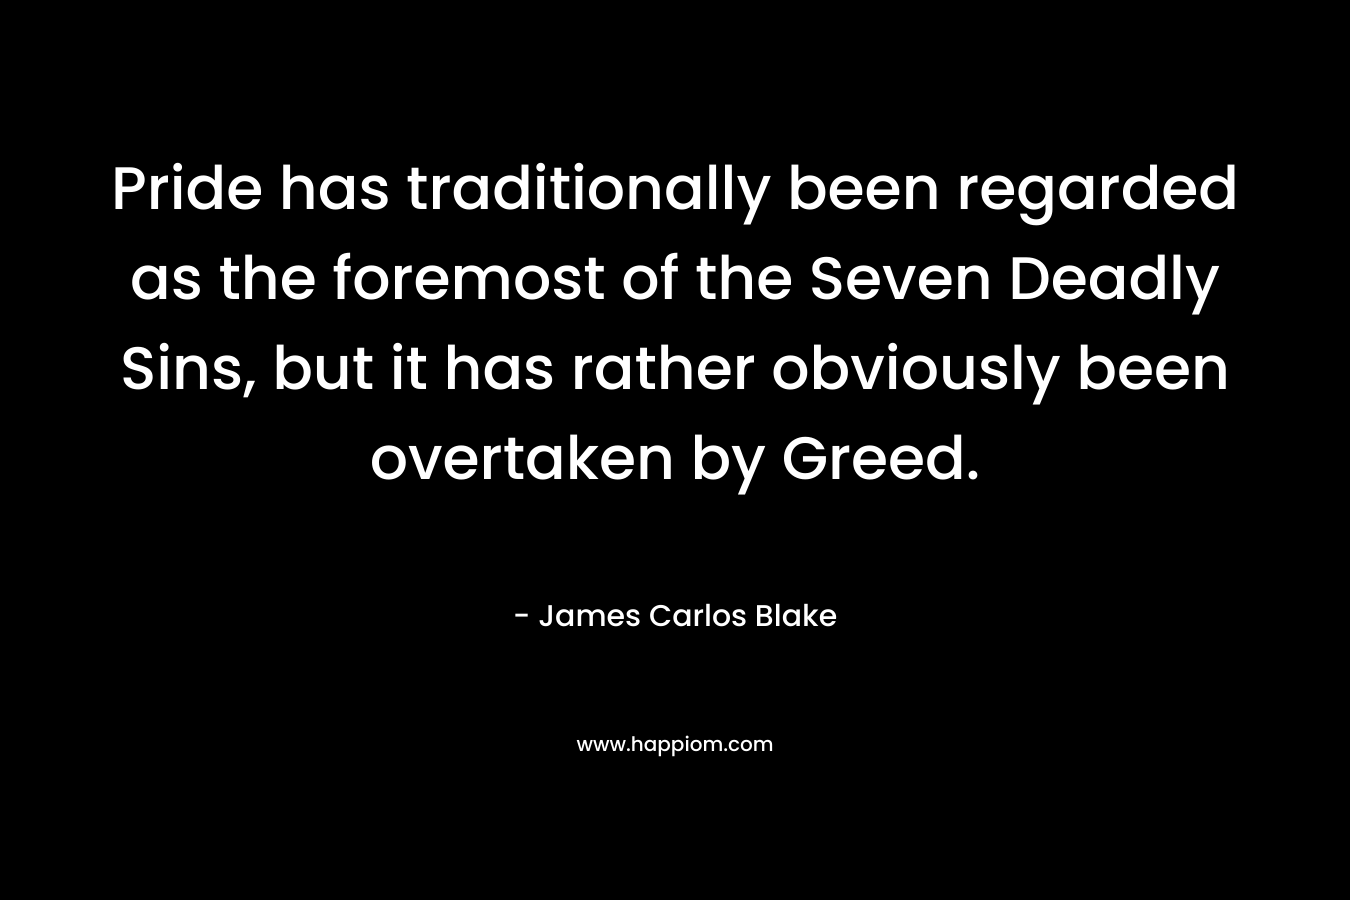 Pride has traditionally been regarded as the foremost of the Seven Deadly Sins, but it has rather obviously been overtaken by Greed. – James Carlos Blake